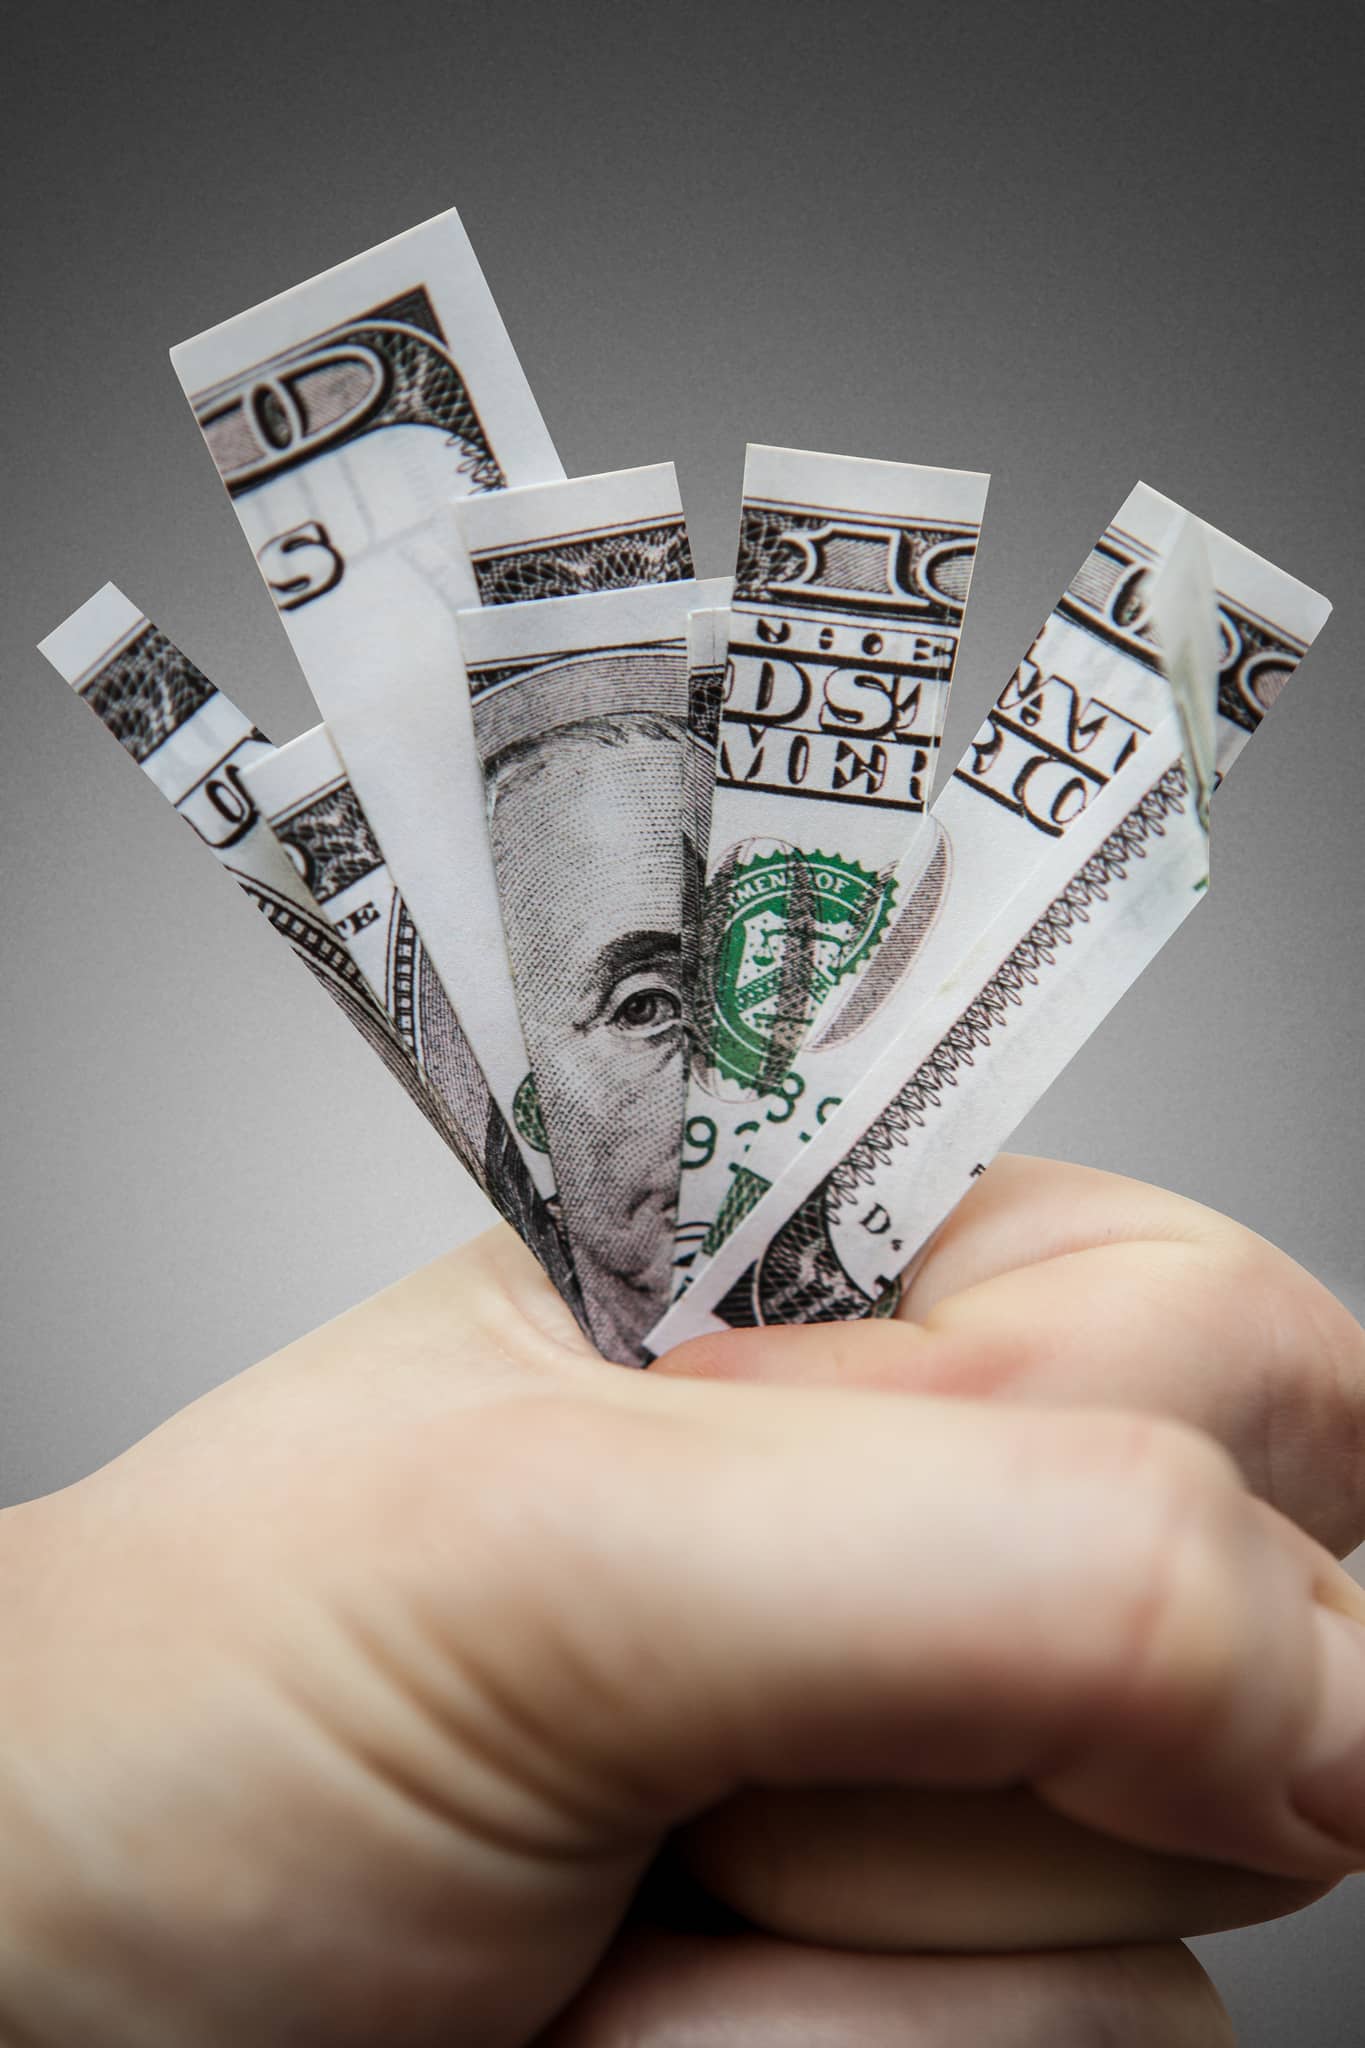 photo of cut up money in hand